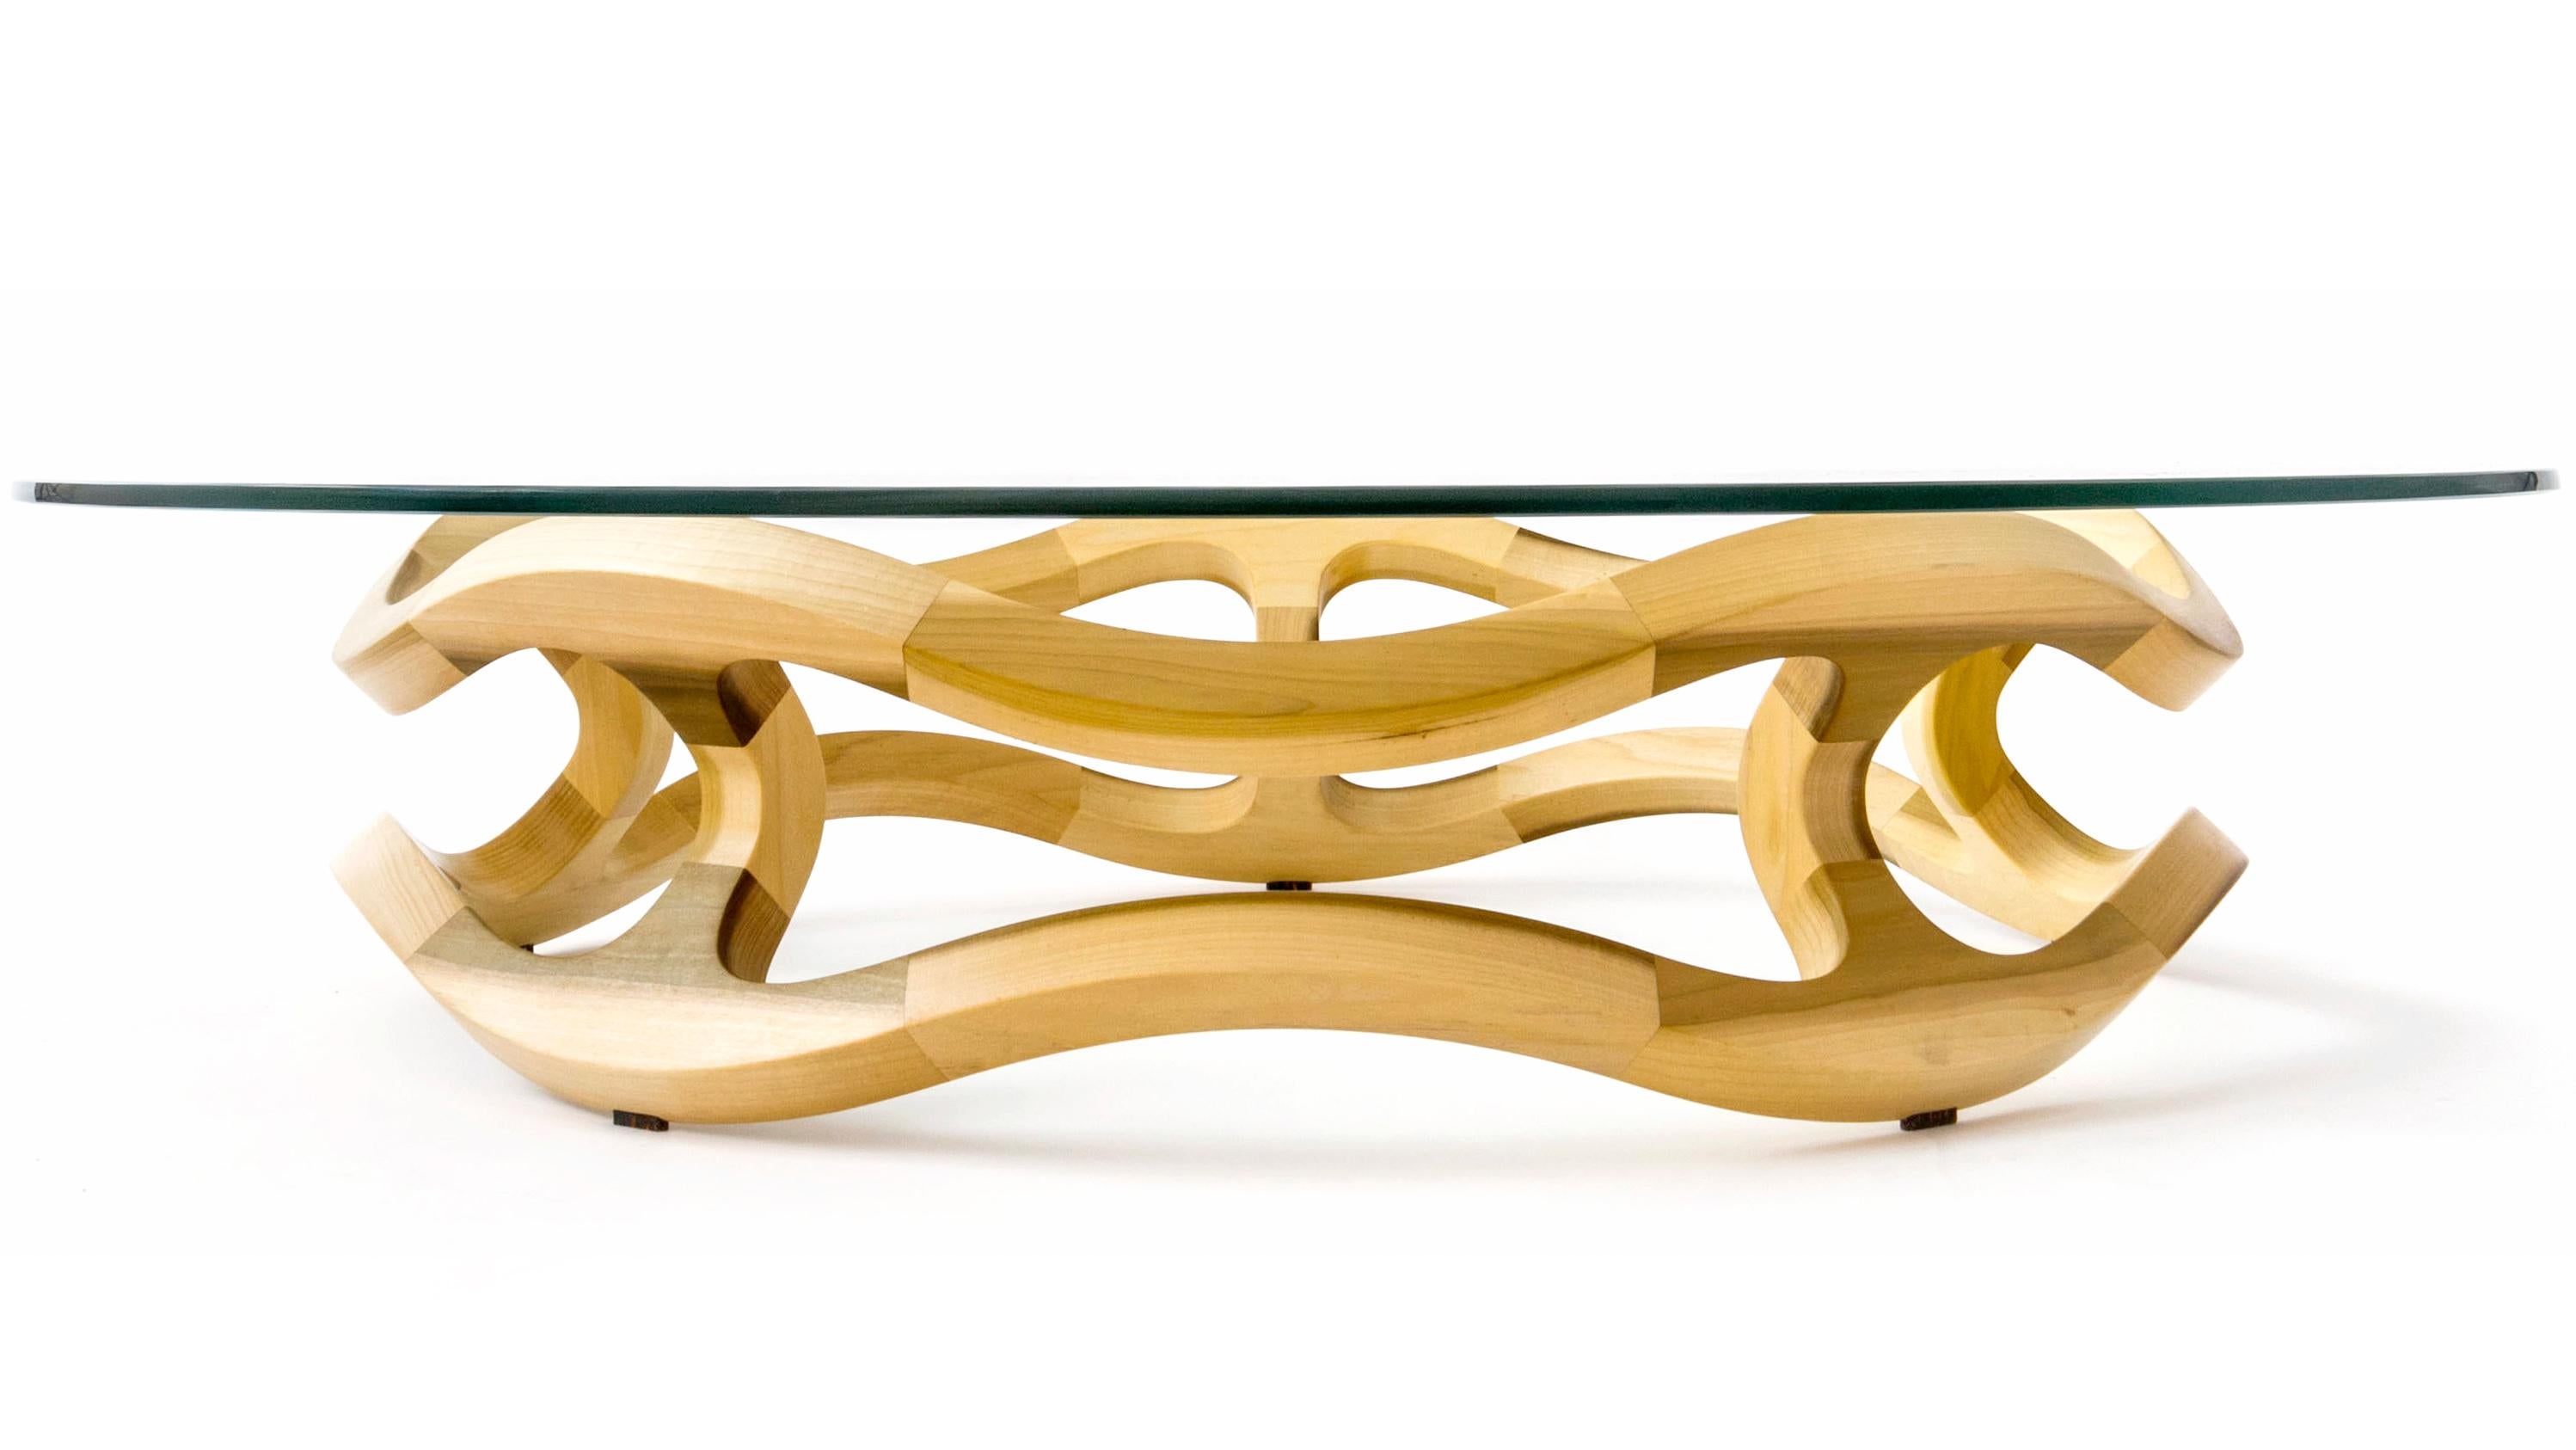 Flamenca, Geometric Sculptural Center Table Made of Solid Wood by Pedro Cerisola For Sale 4